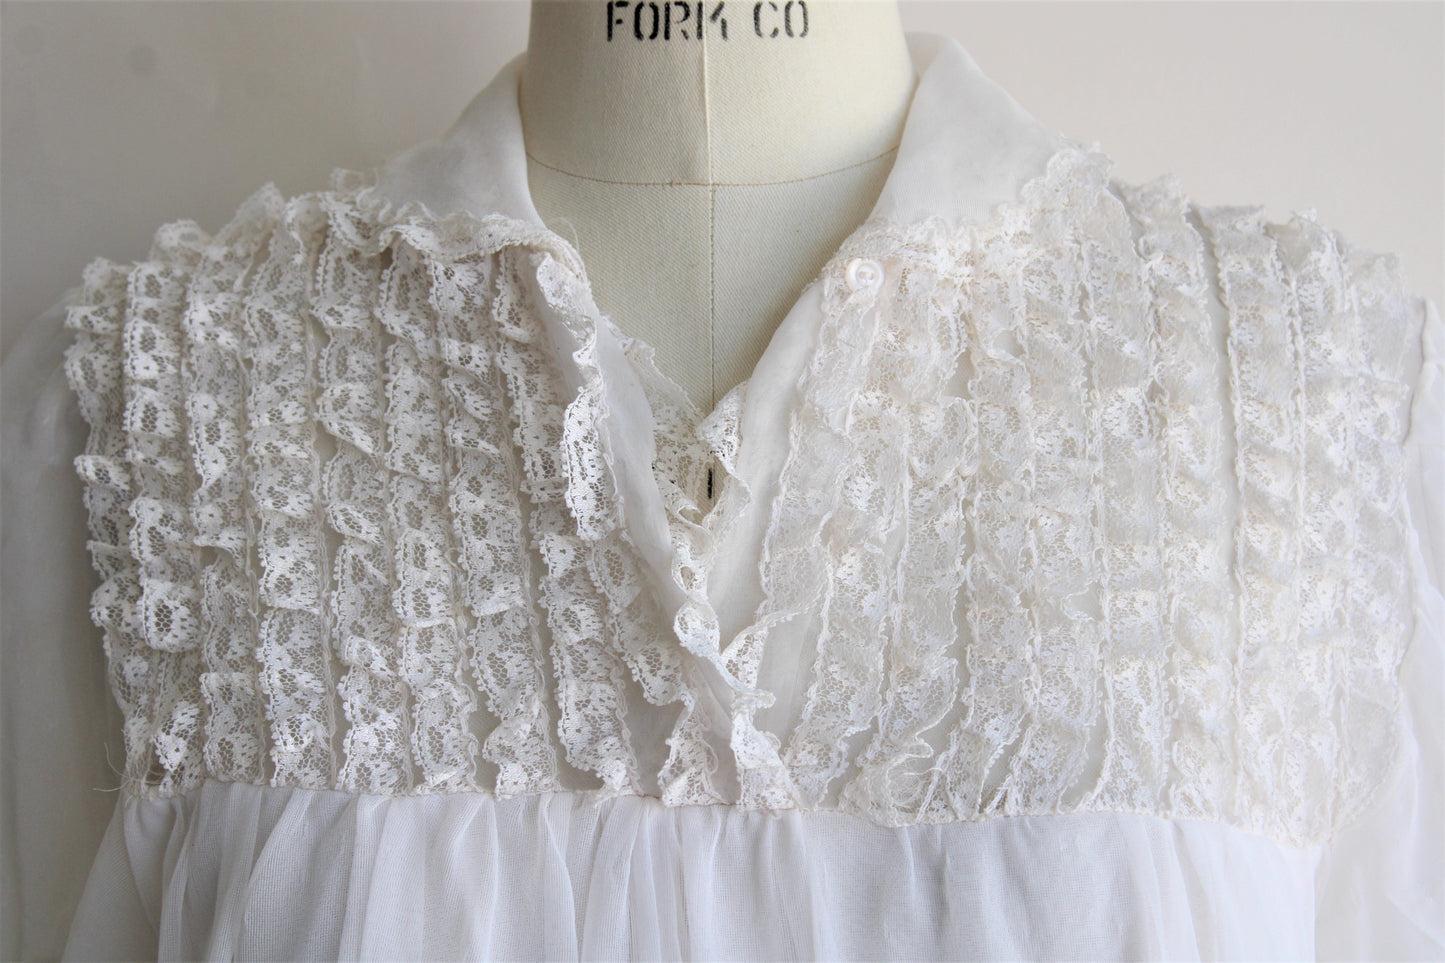 Vintage 1960s White Babydoll Nightie with Lace Trim